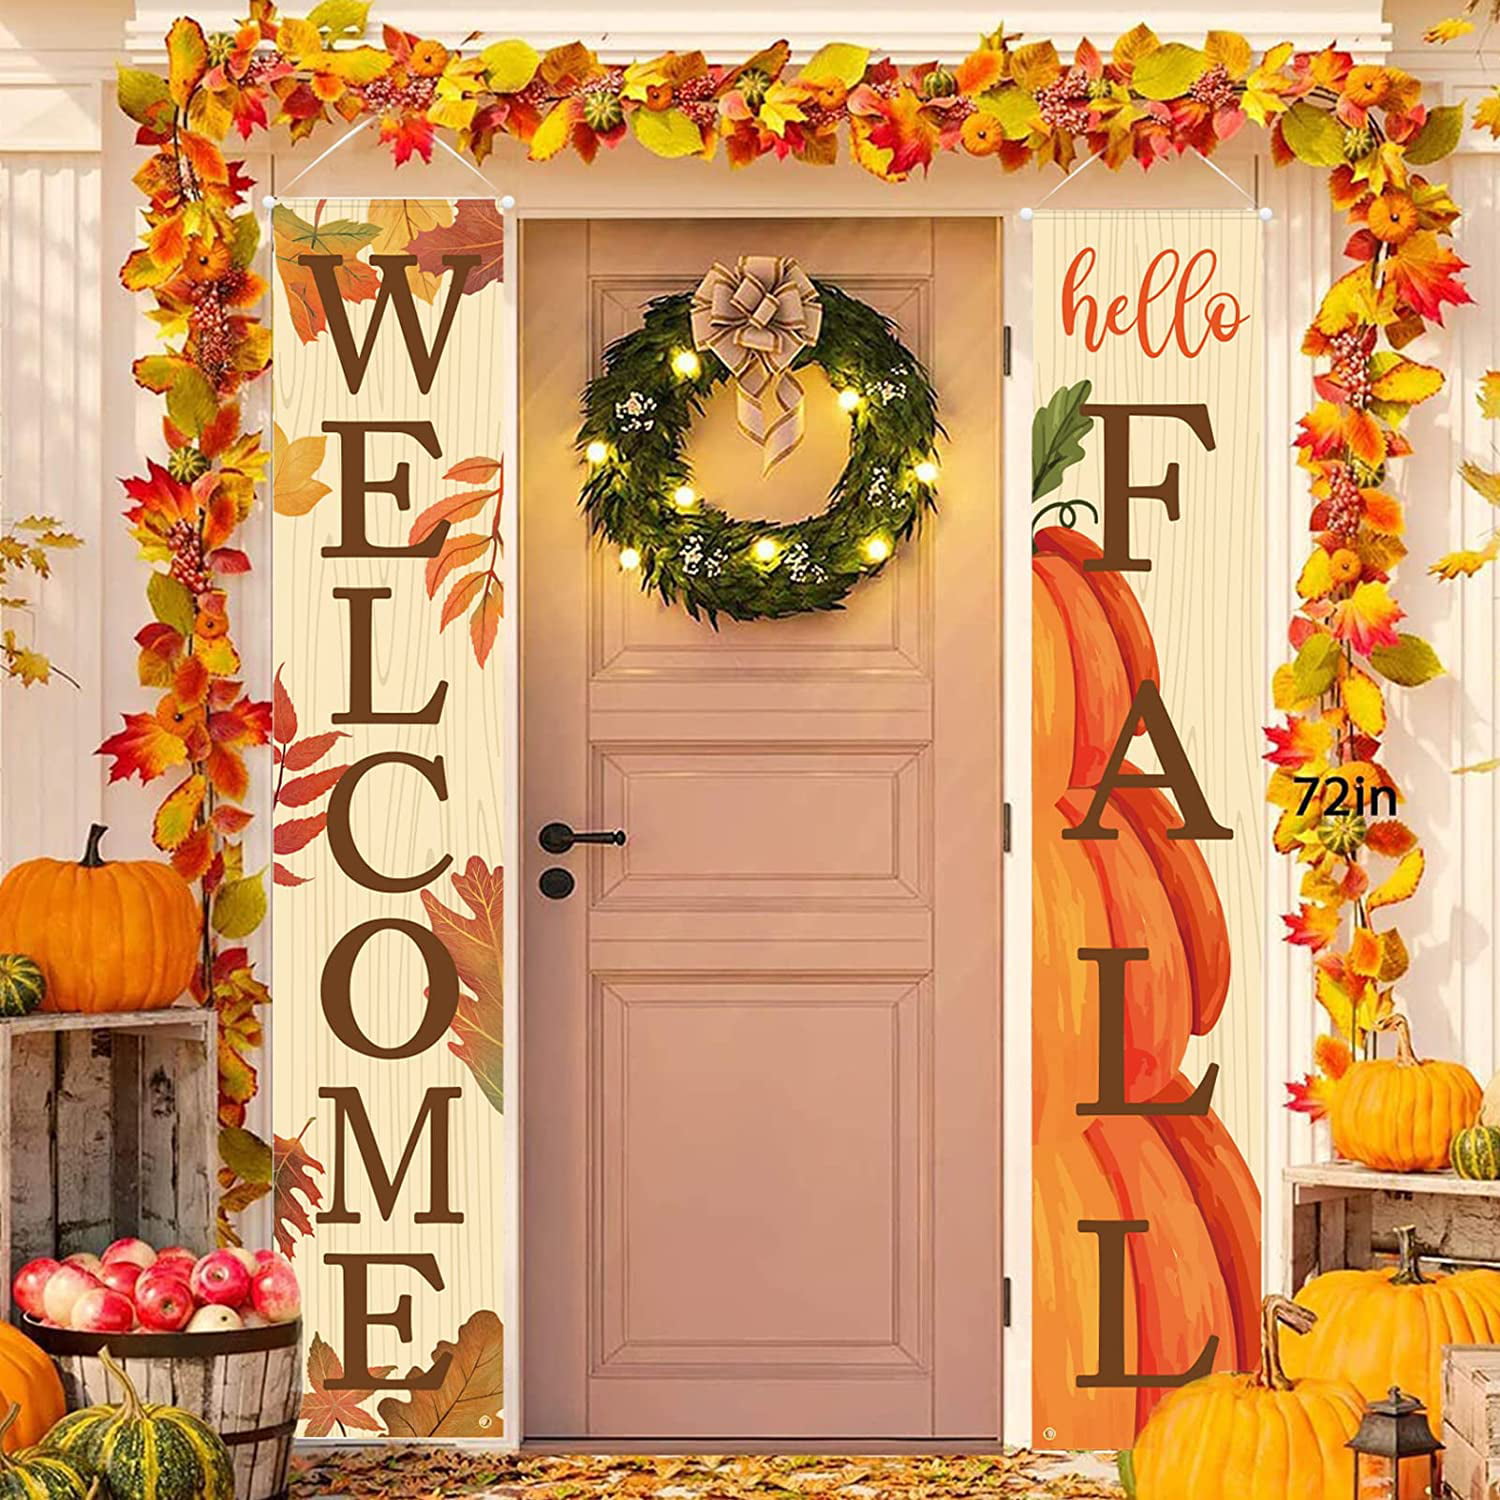 Fall Decor- Fall Decorations for Home - Welcome & Hello Fall Signs ...